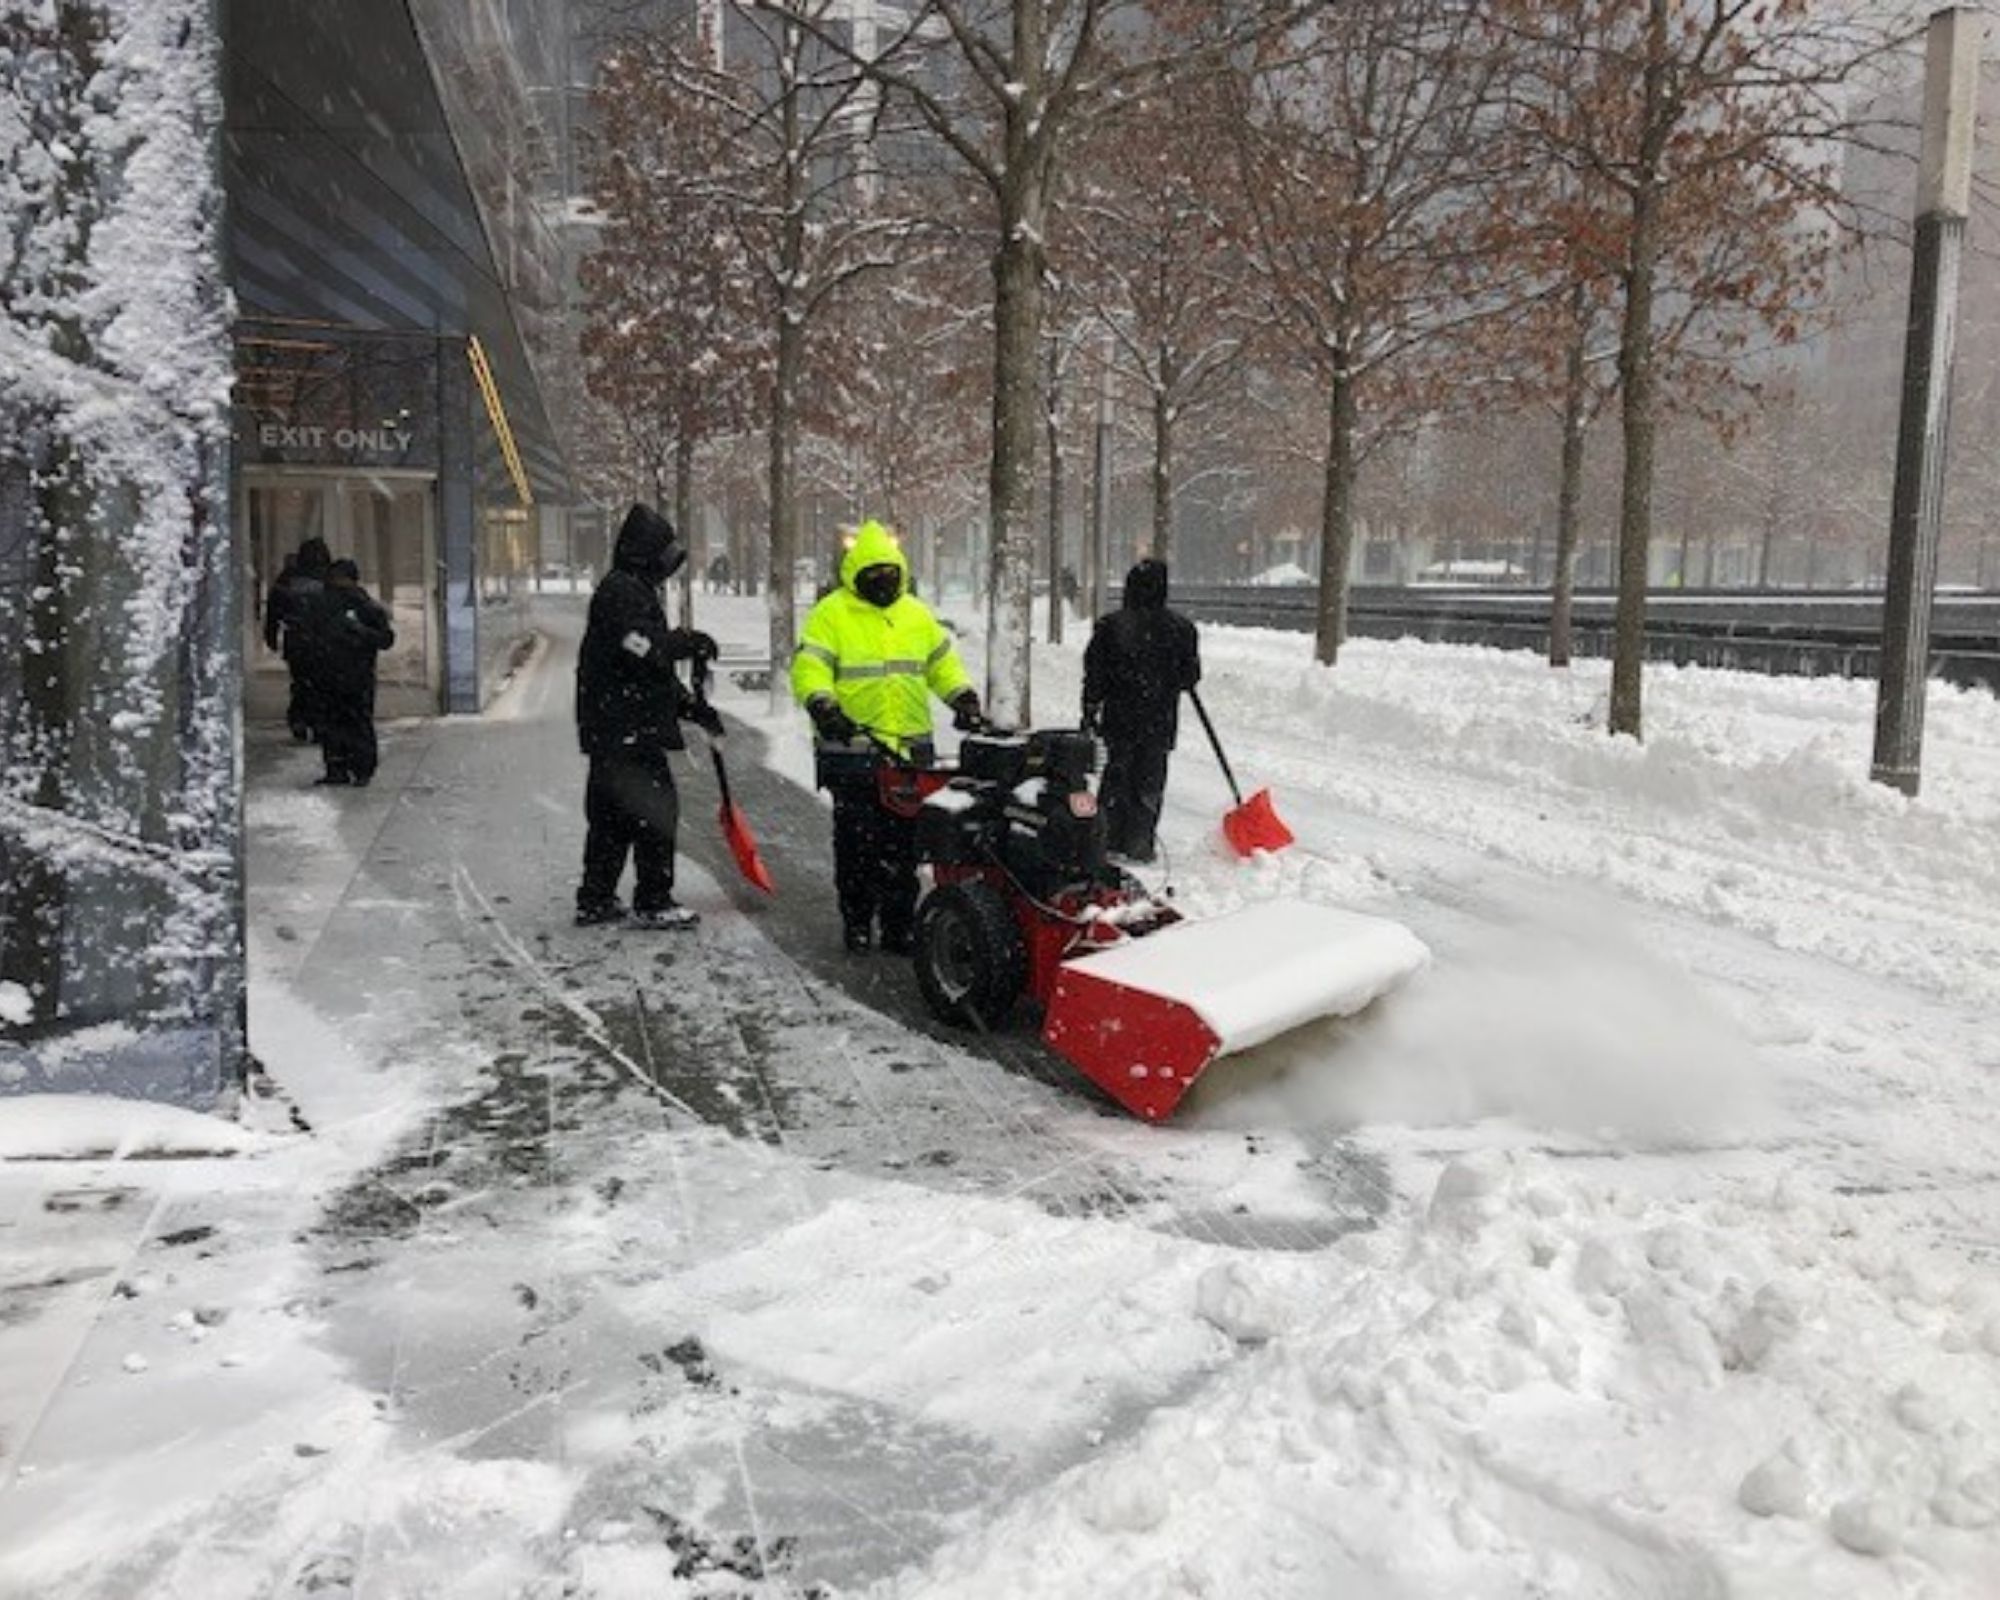 Workers clear a path in the snow along the Memorial